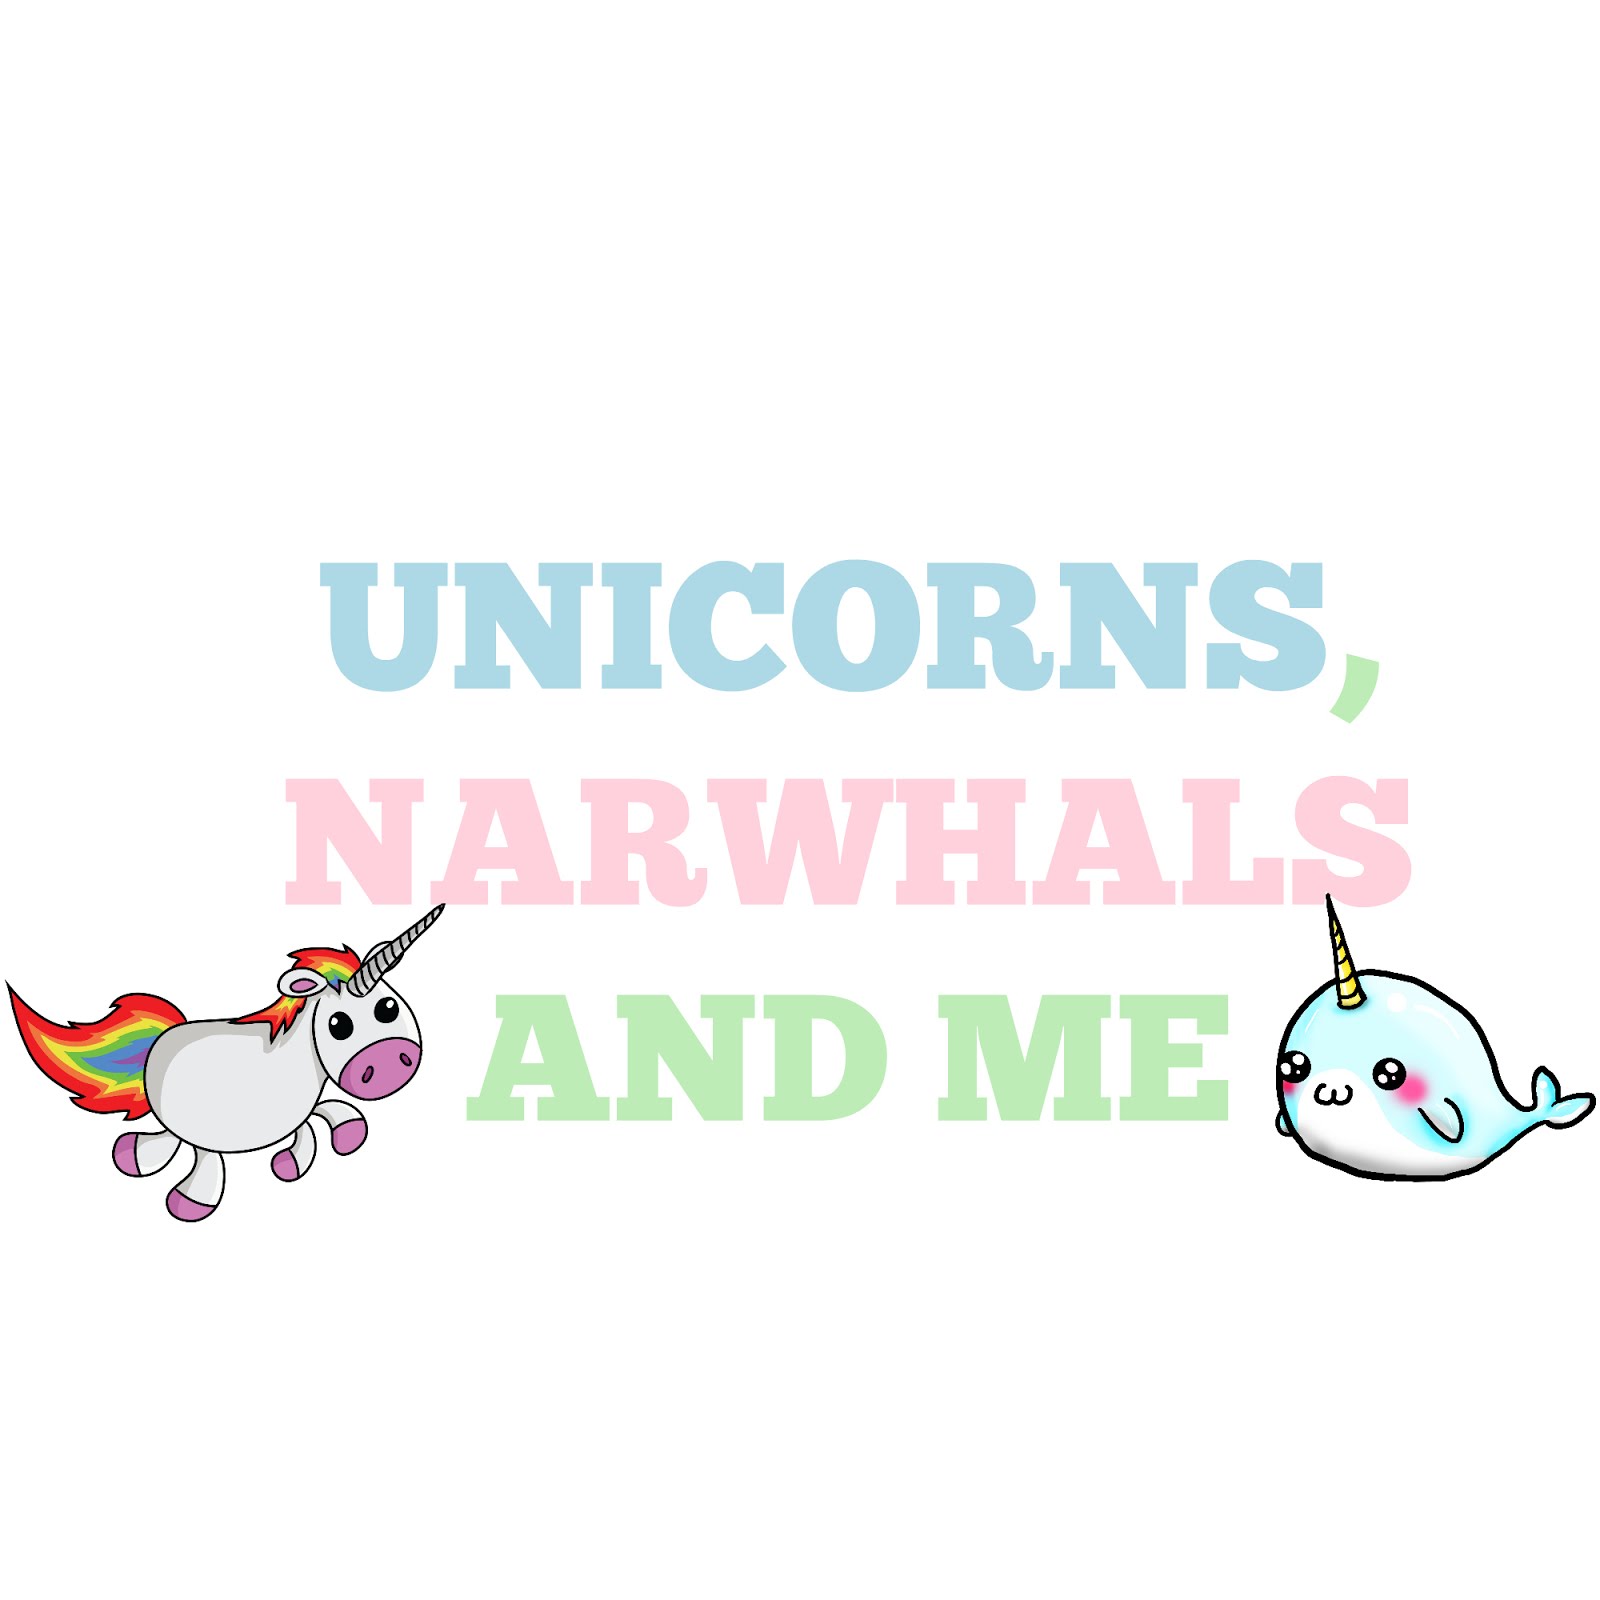 Unicorns, Narwhals And Me